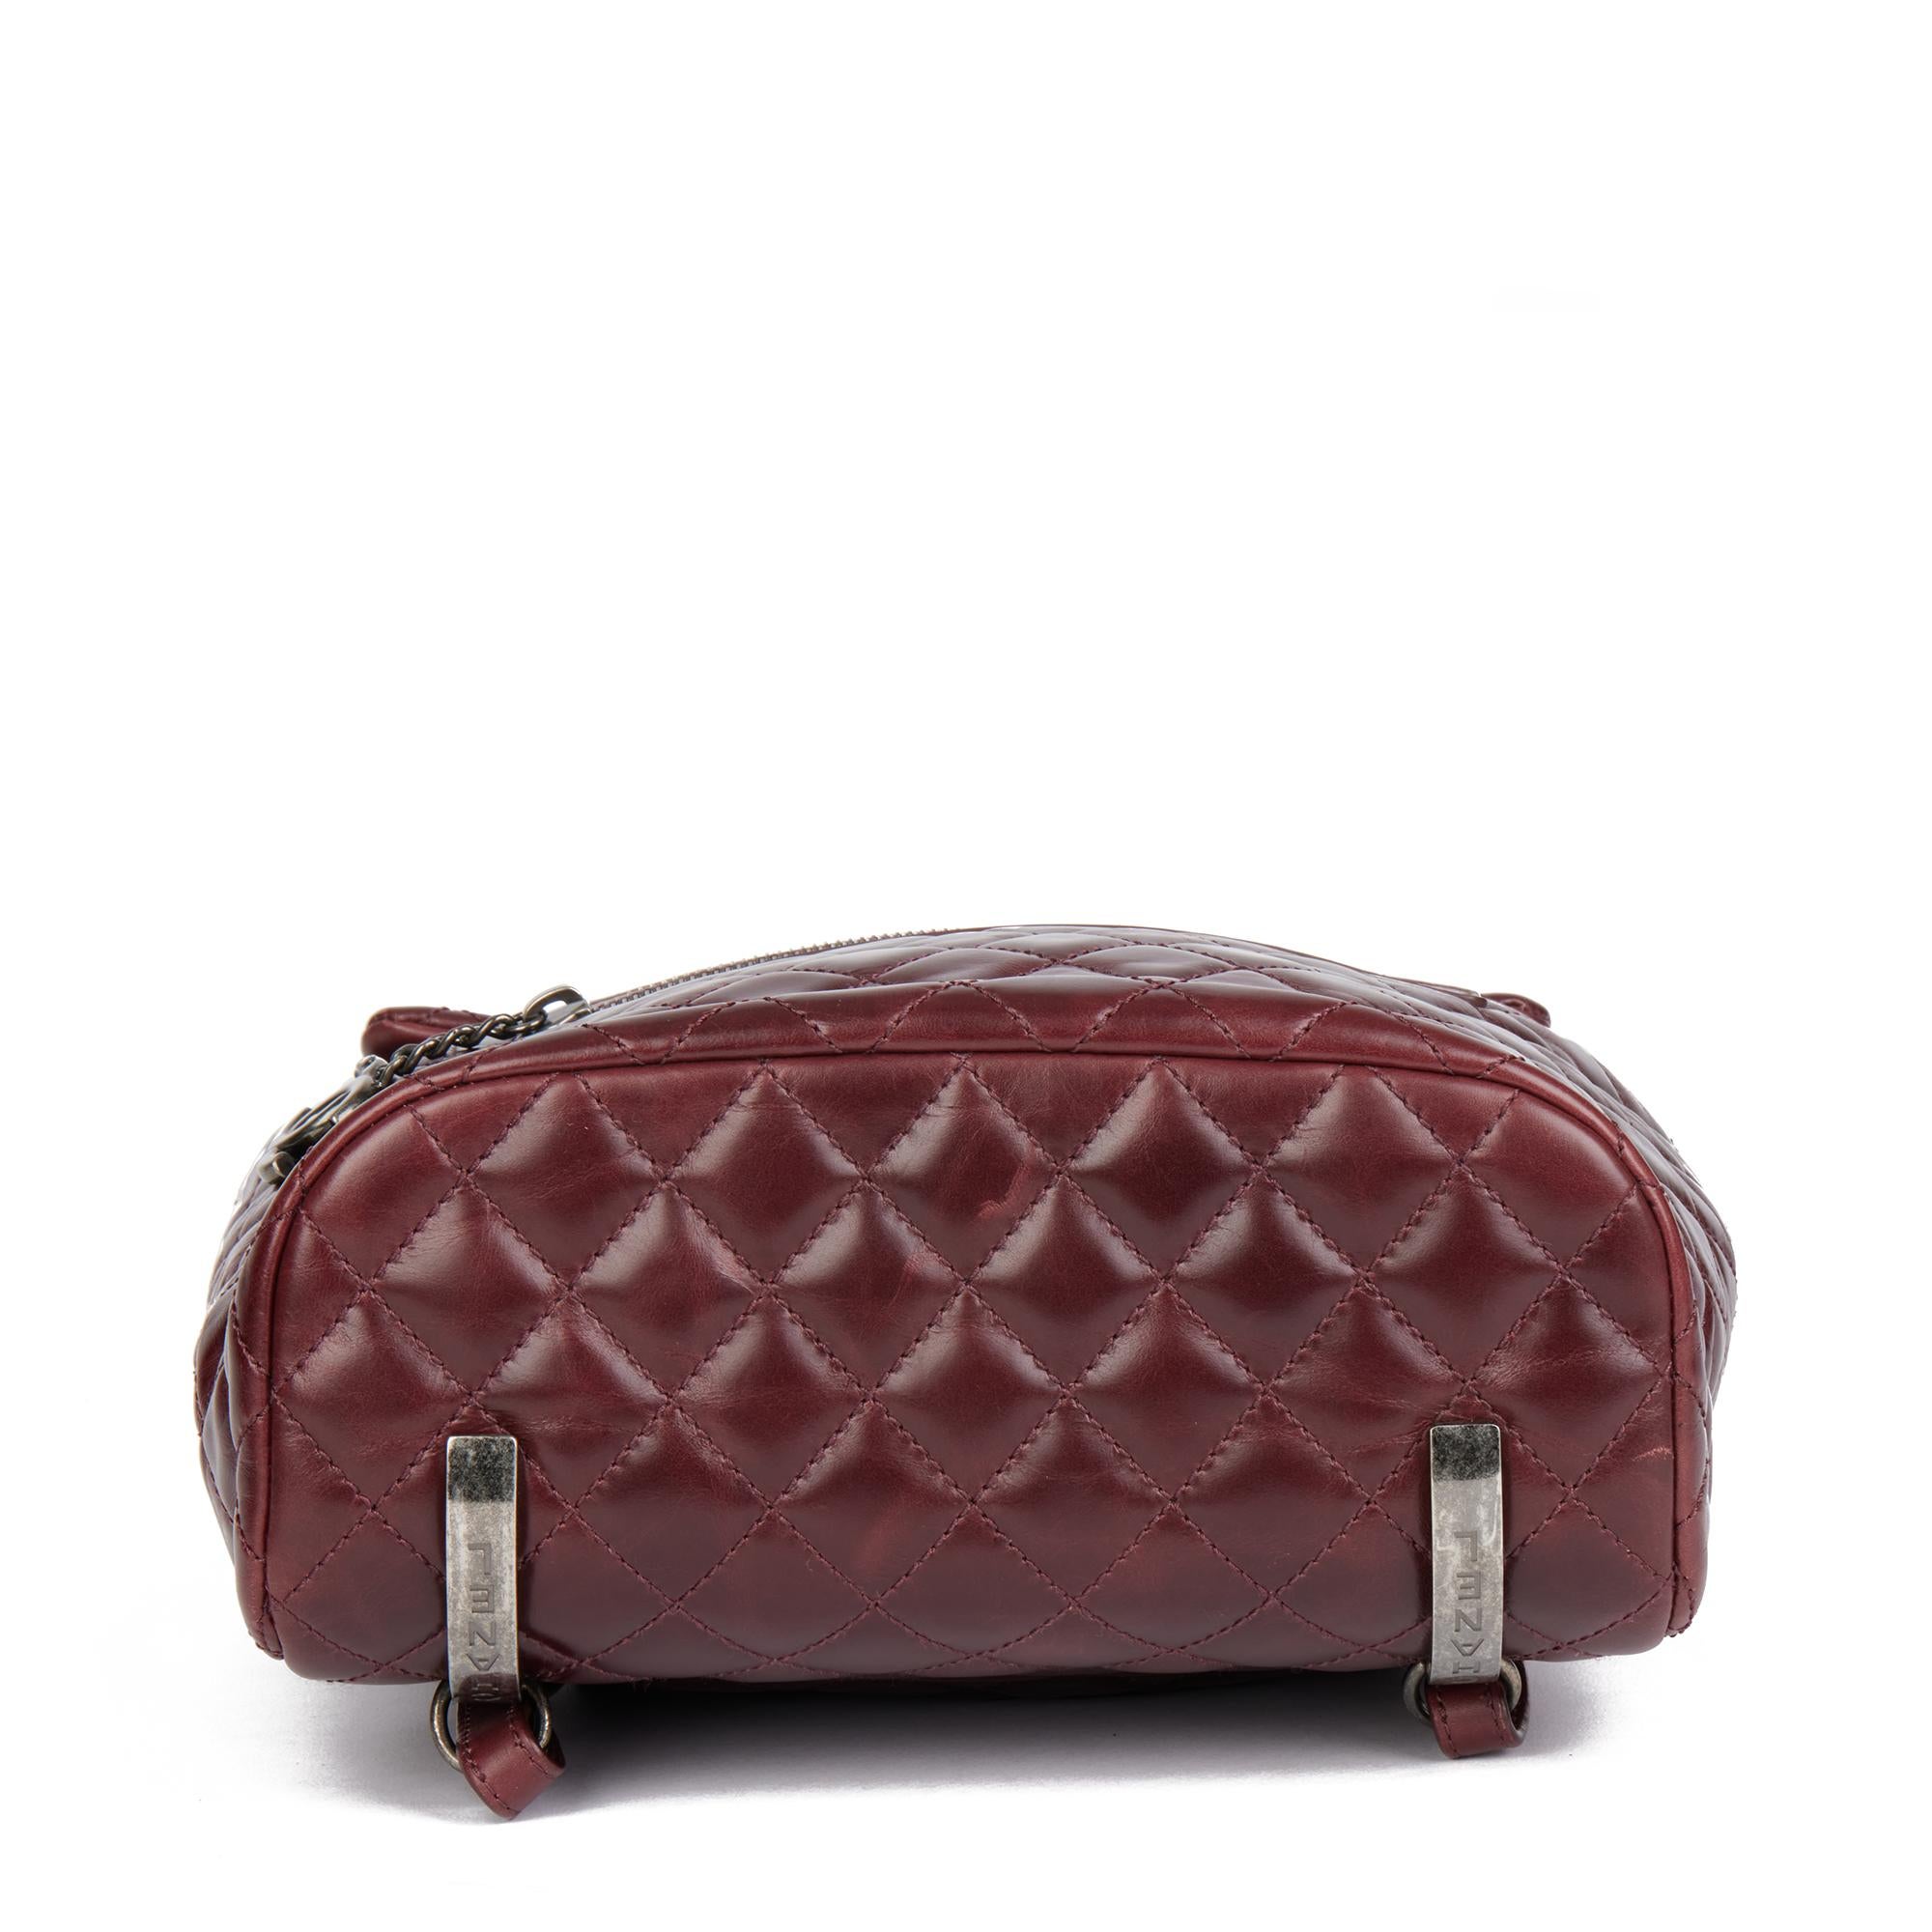 Women's CHANEL Burgundy Calfskin Leather Small Mountain Backpack